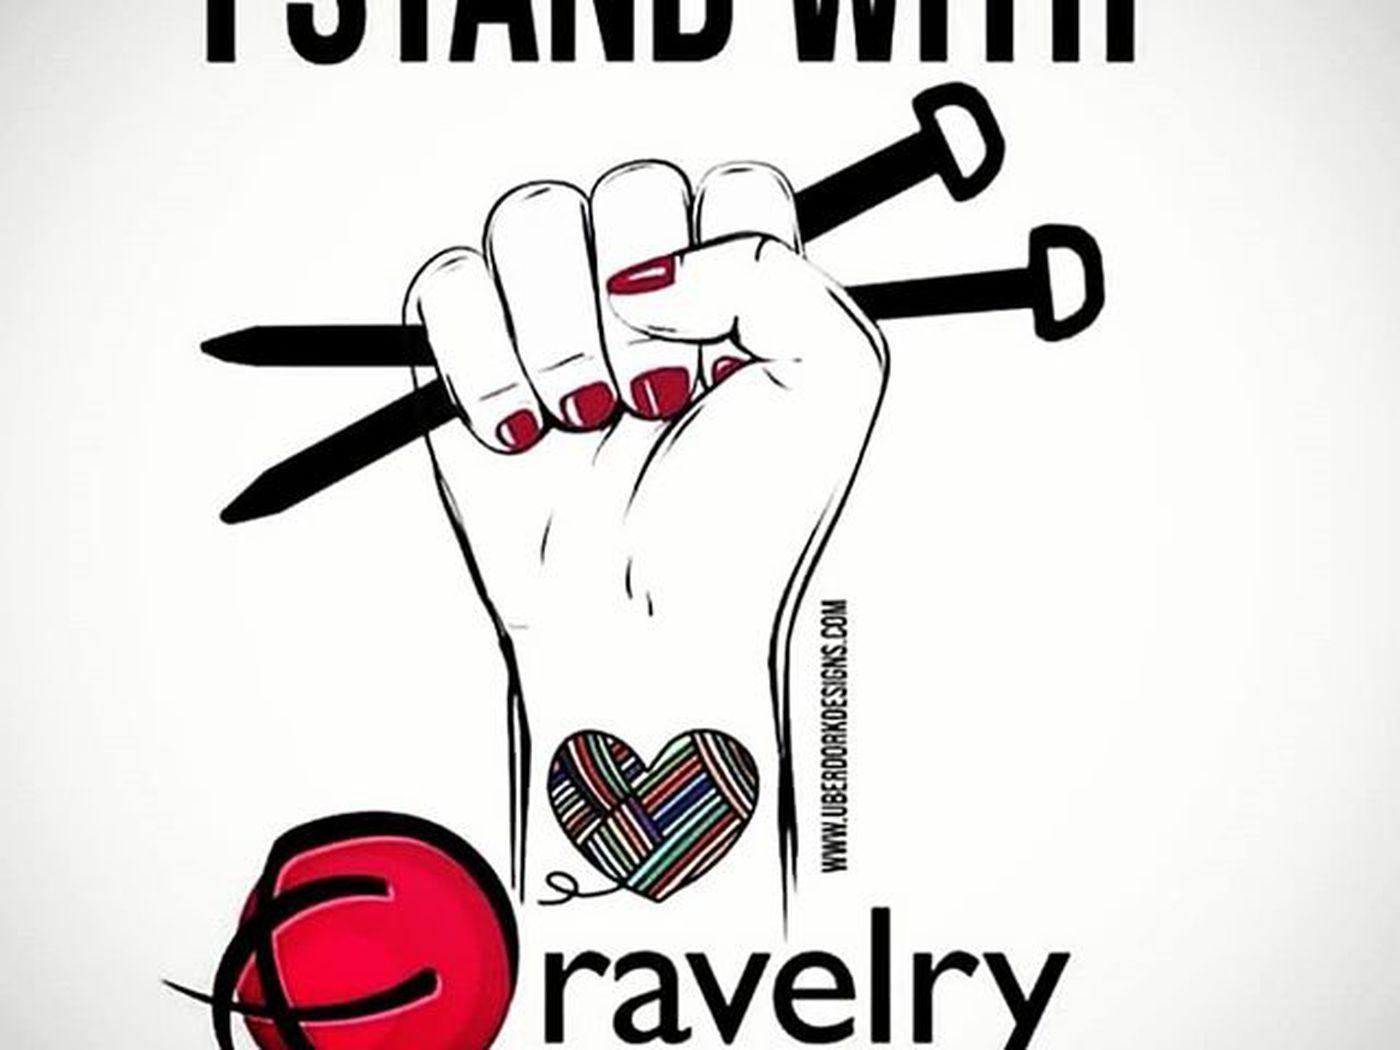 Ravelry Logo - Ravelry bans Trump support: why a knitting website is facing ...